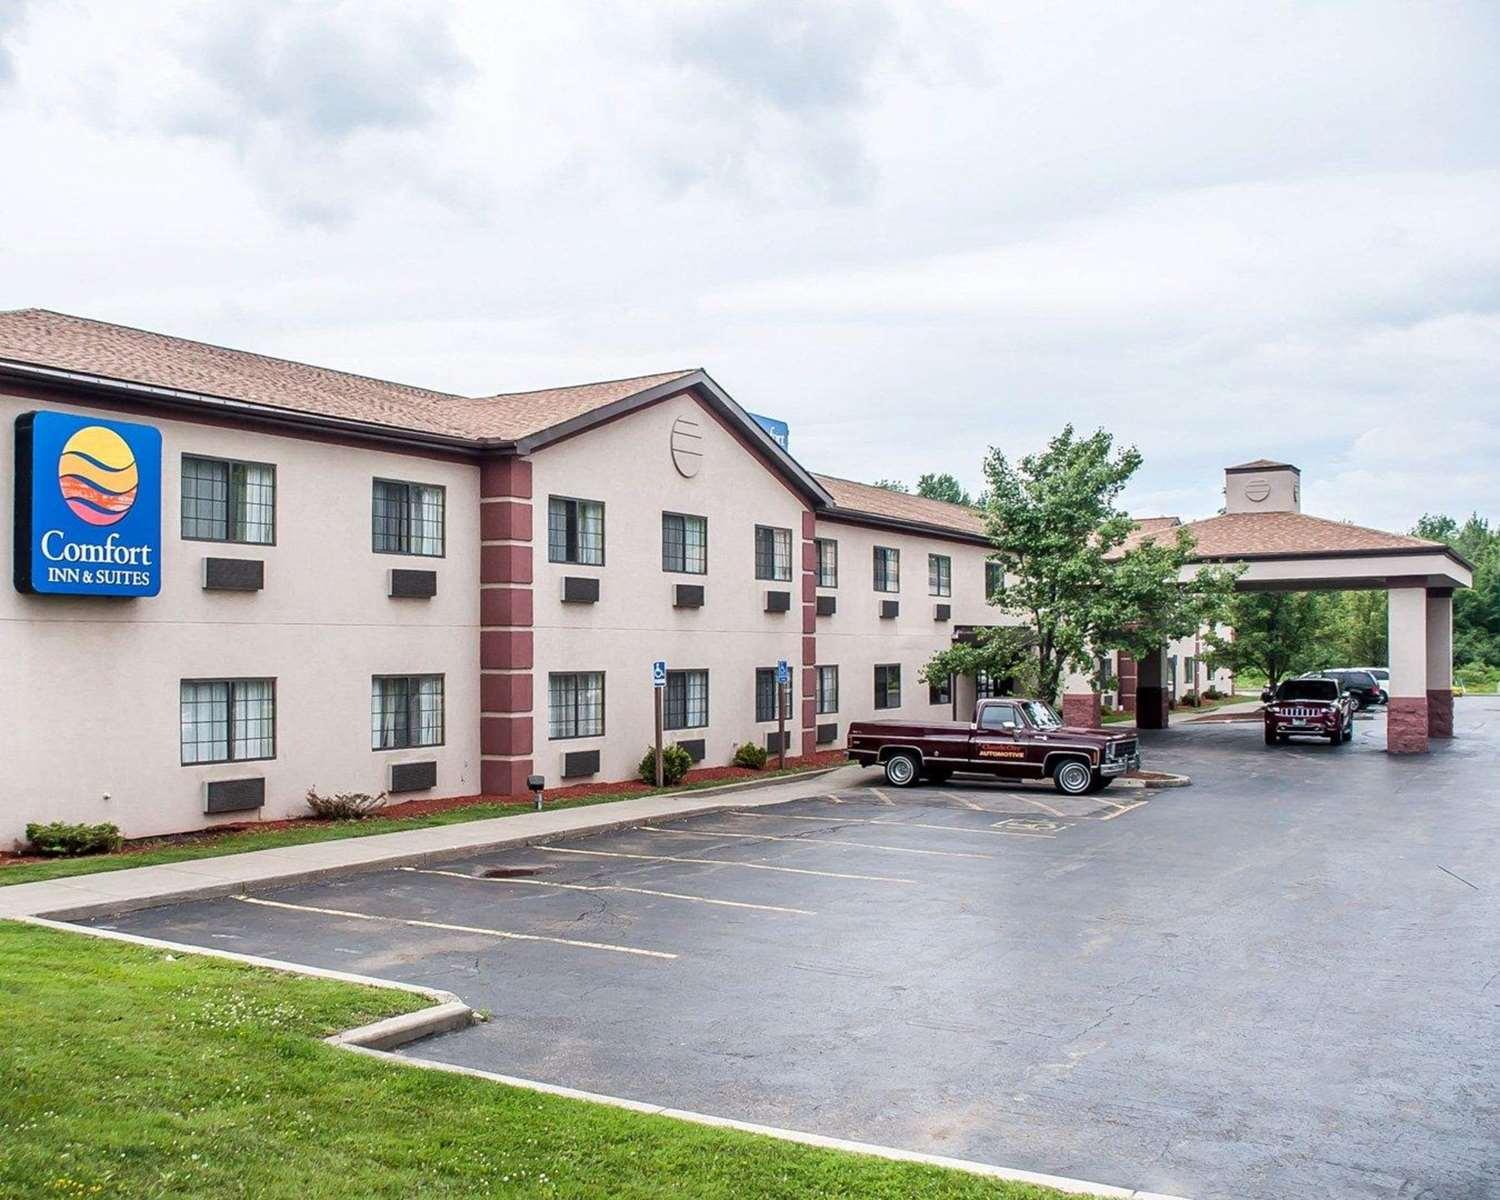 Comfort Inn and Suites in Hamburg, NY